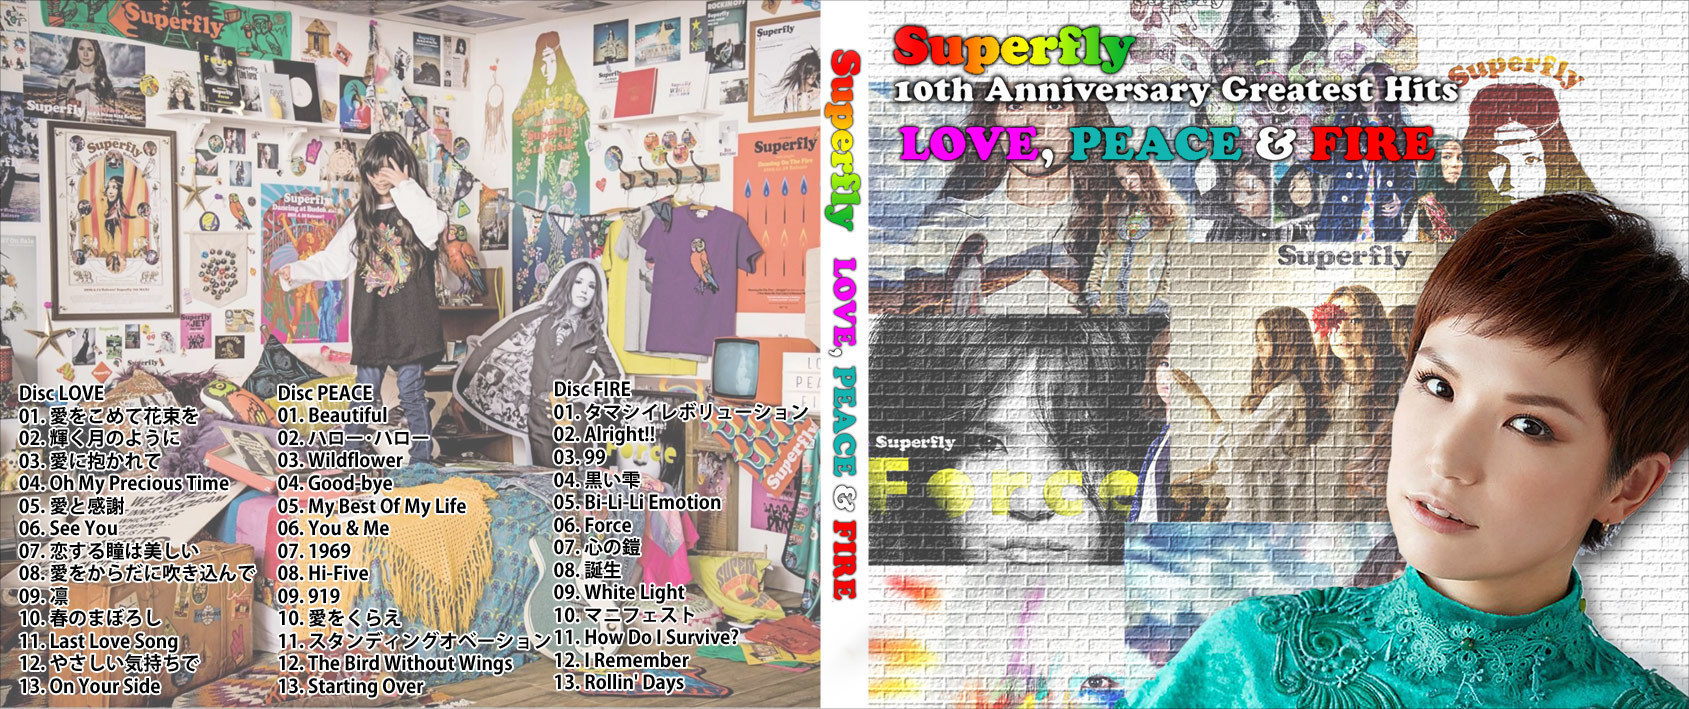 Superfly ～ 10th Anniversary Greatest Hits “LOVE, PEACE & FIRE